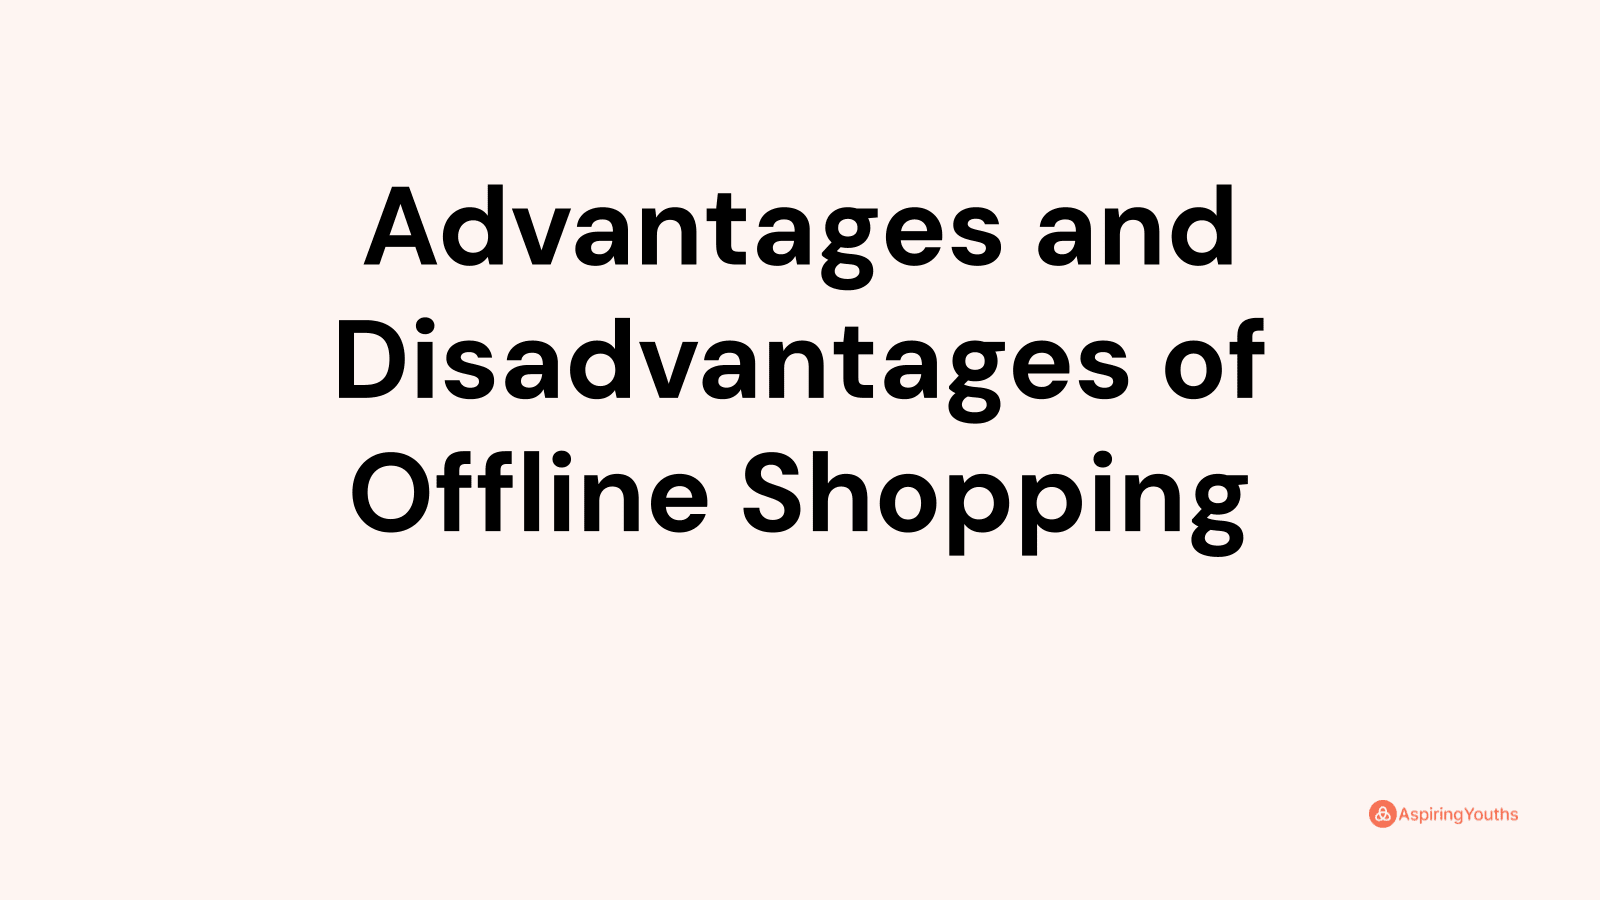 Advantages and disadvantages of Offline Shopping